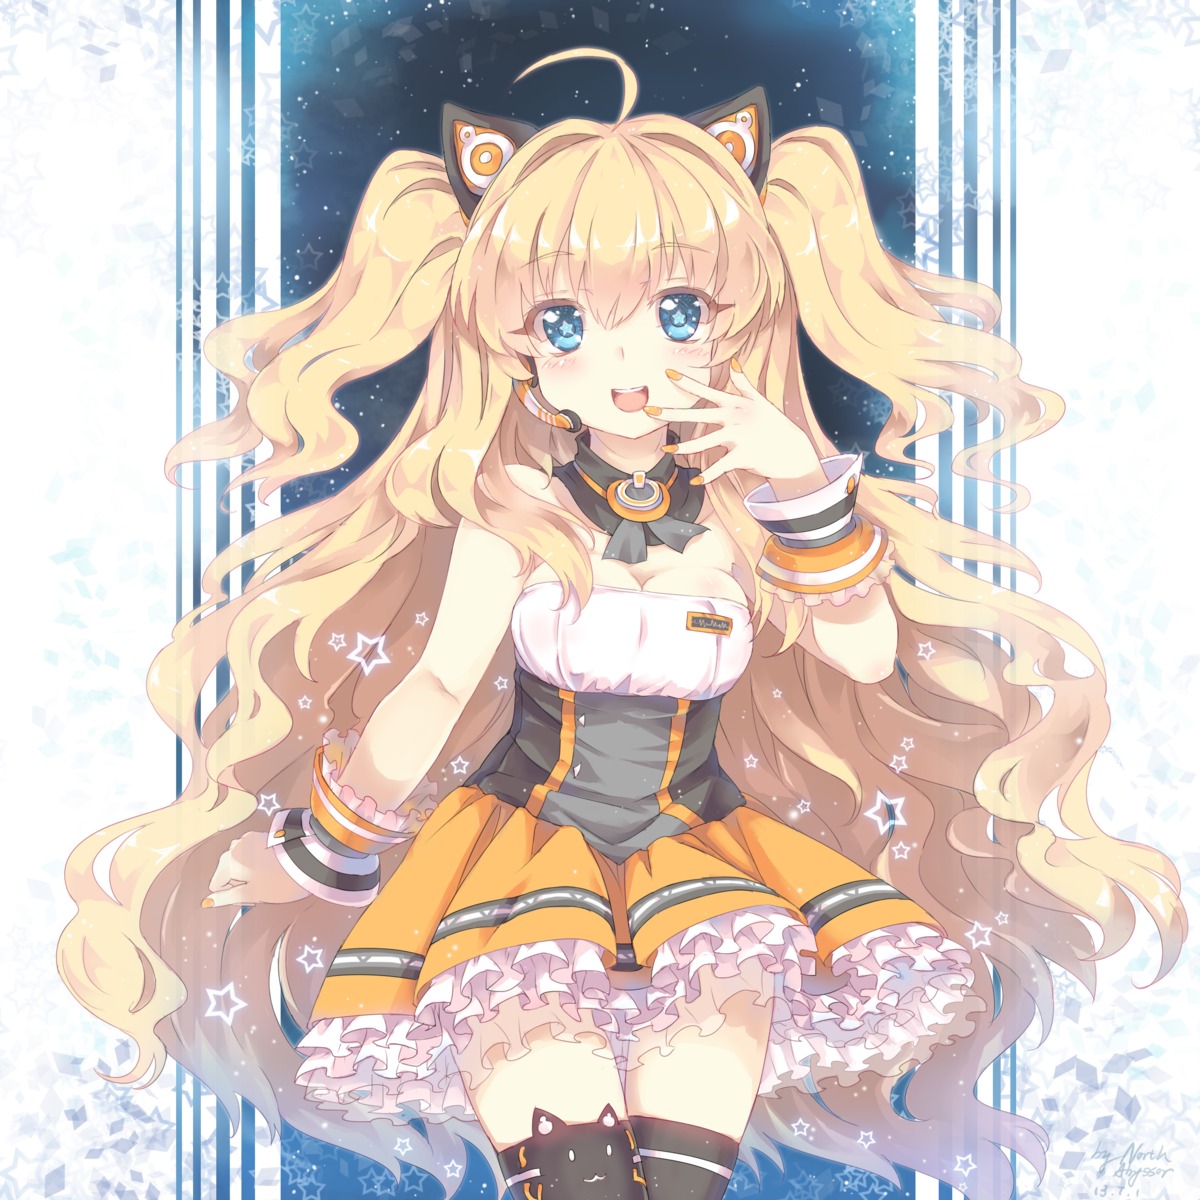 abyss_of_parliament animal_ears cleavage nekomimi see_through seeu thighhighs vocaloid